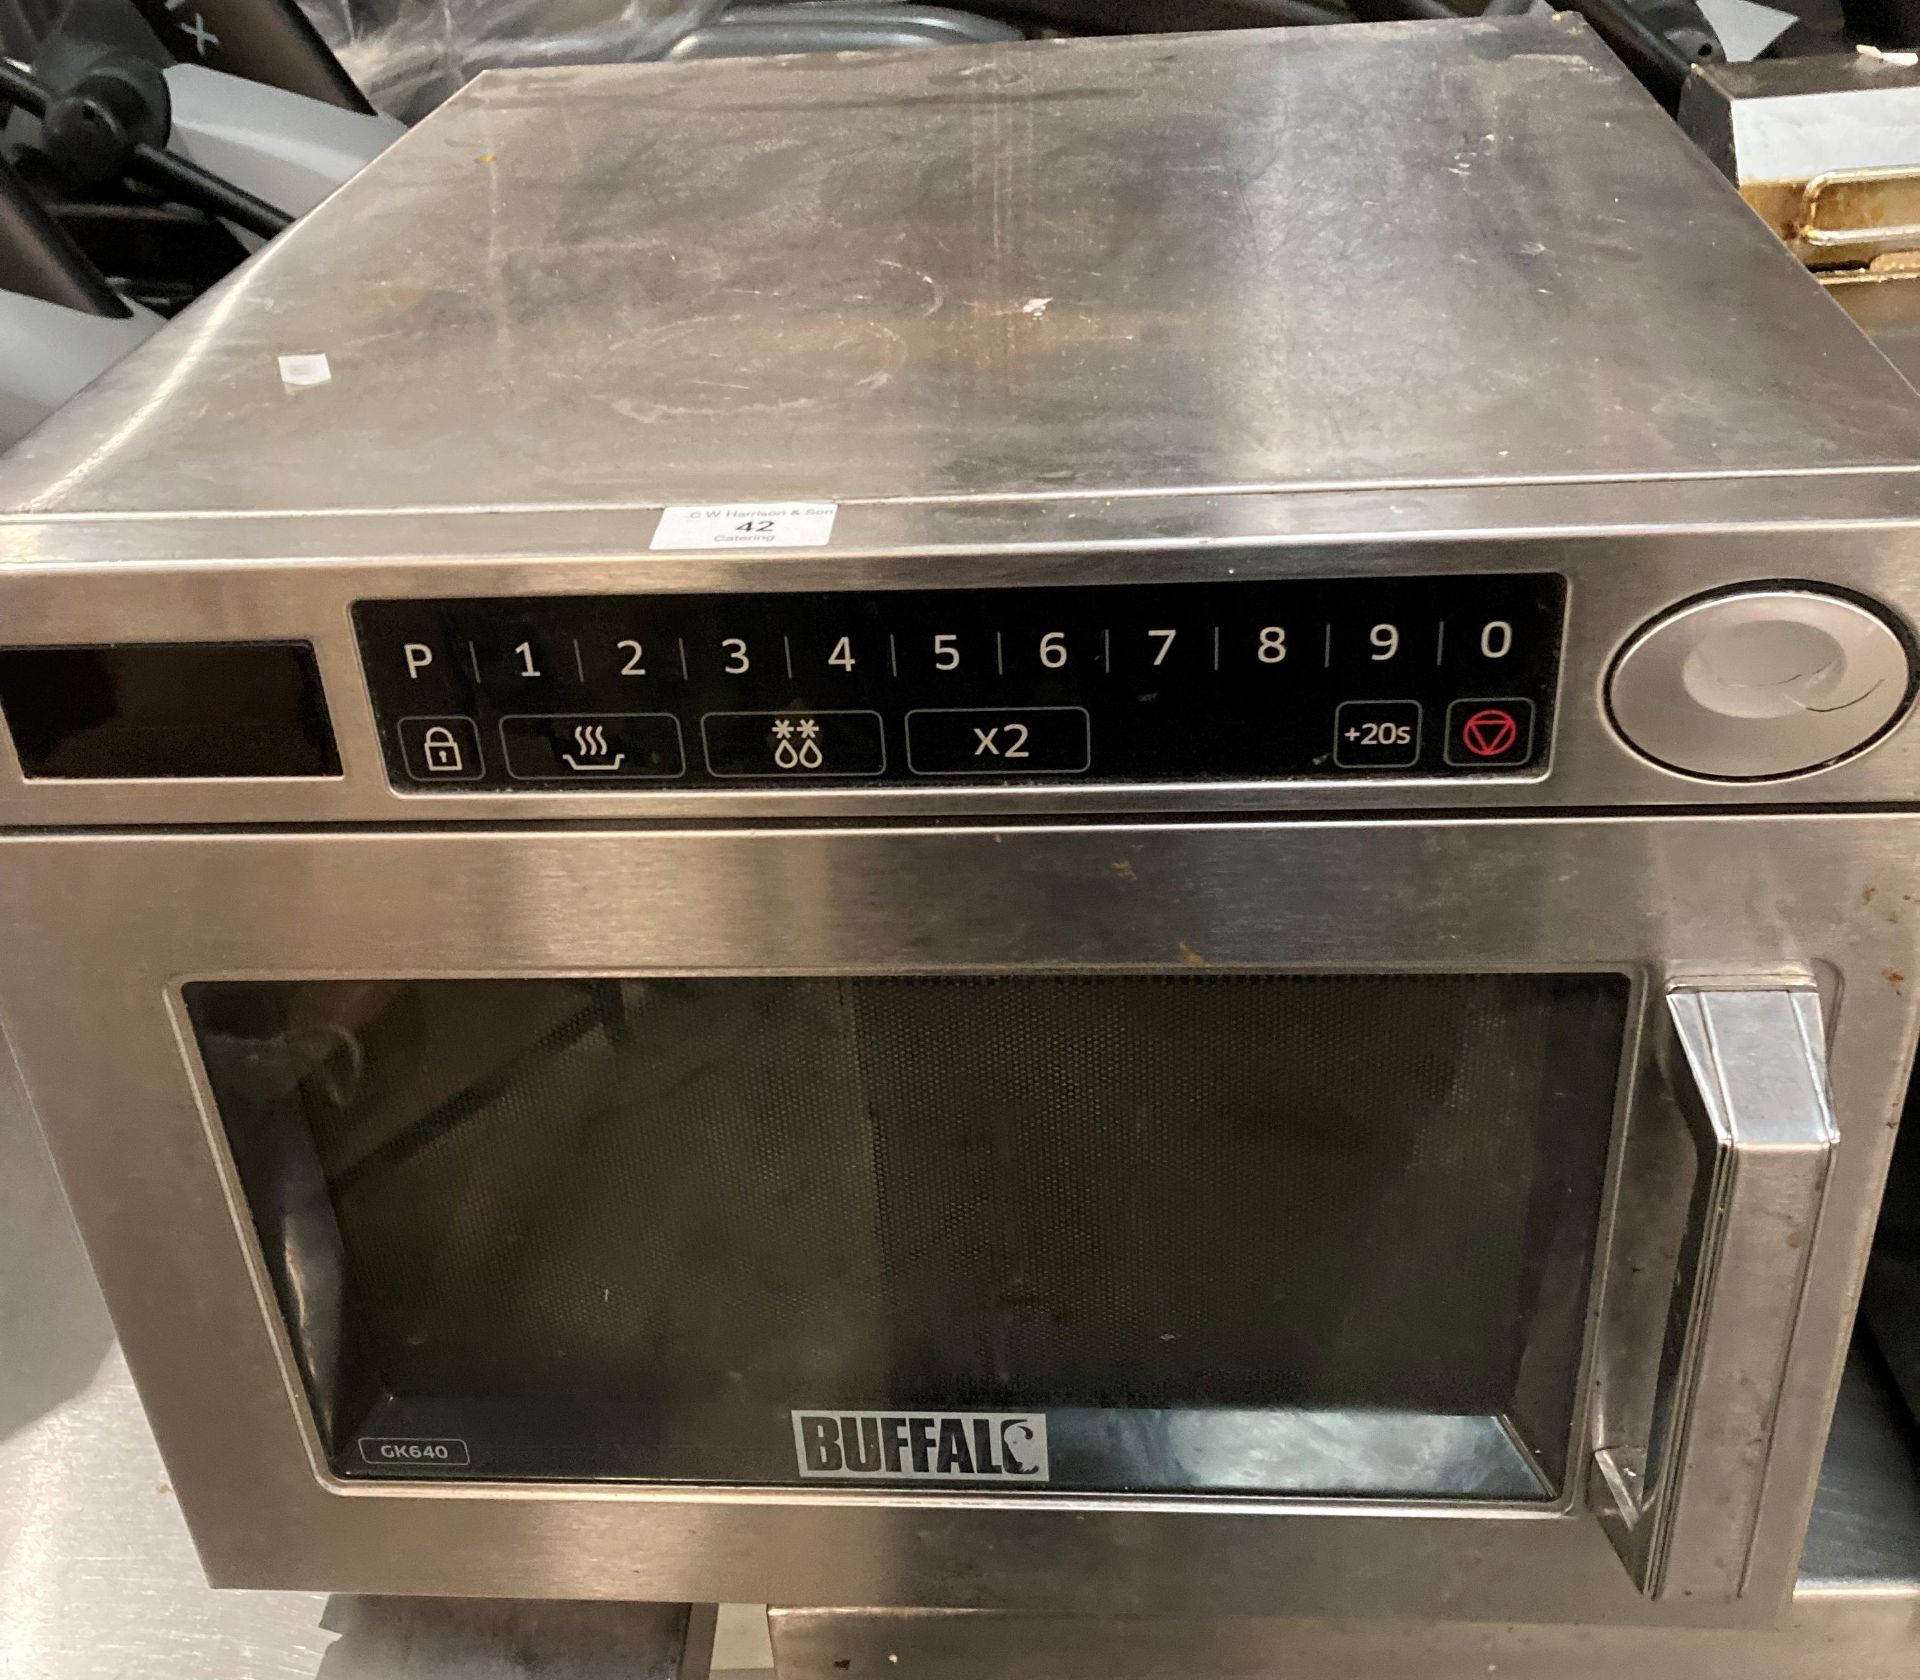 A Buffalo GK640 commercial microwave oven YOM January 2018 240v Further Information